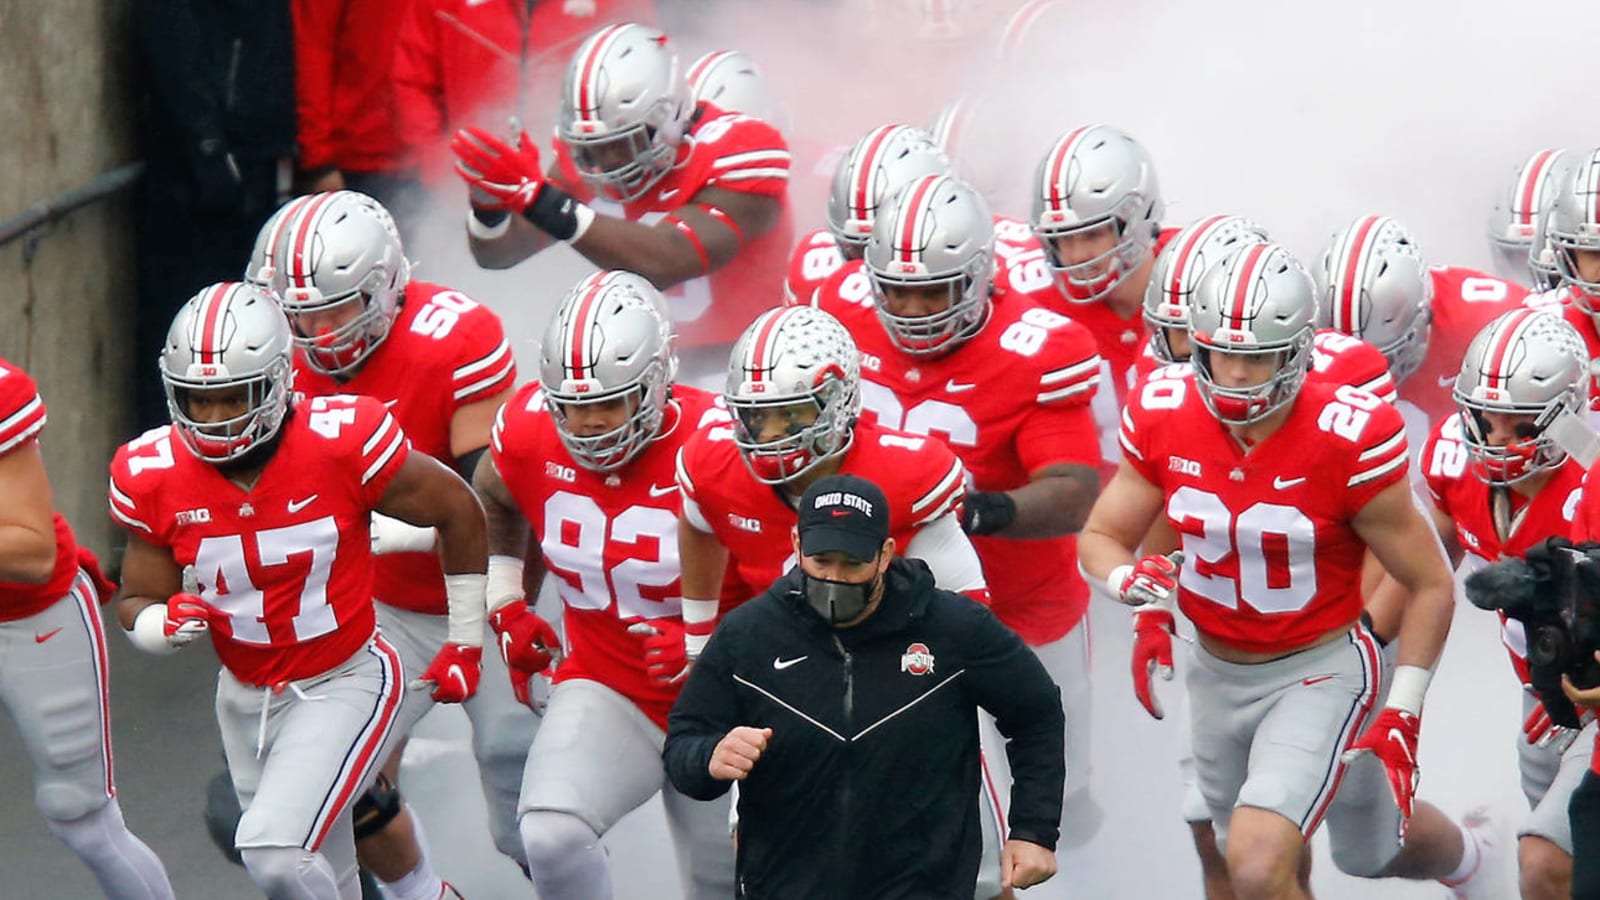 Ohio State will be shorthanded for Big Ten title game